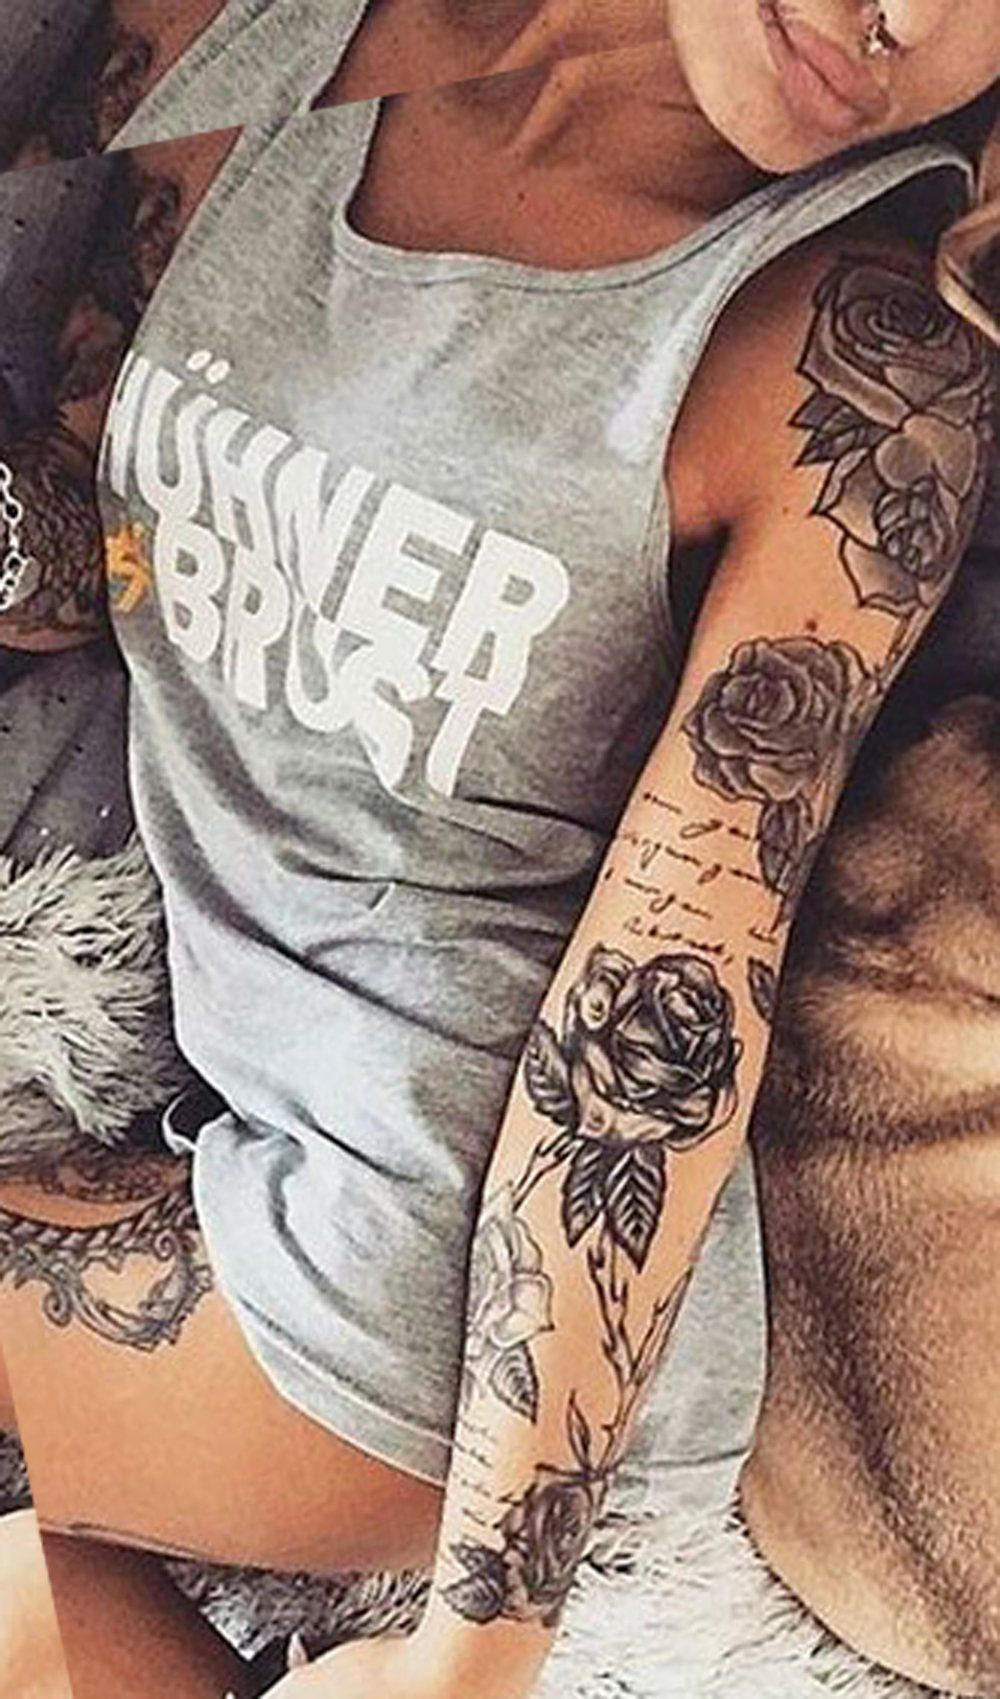 Vintage Realistic Rose Full Arm Sleeve Tattoo Ideas For Women in sizing 1000 X 1699